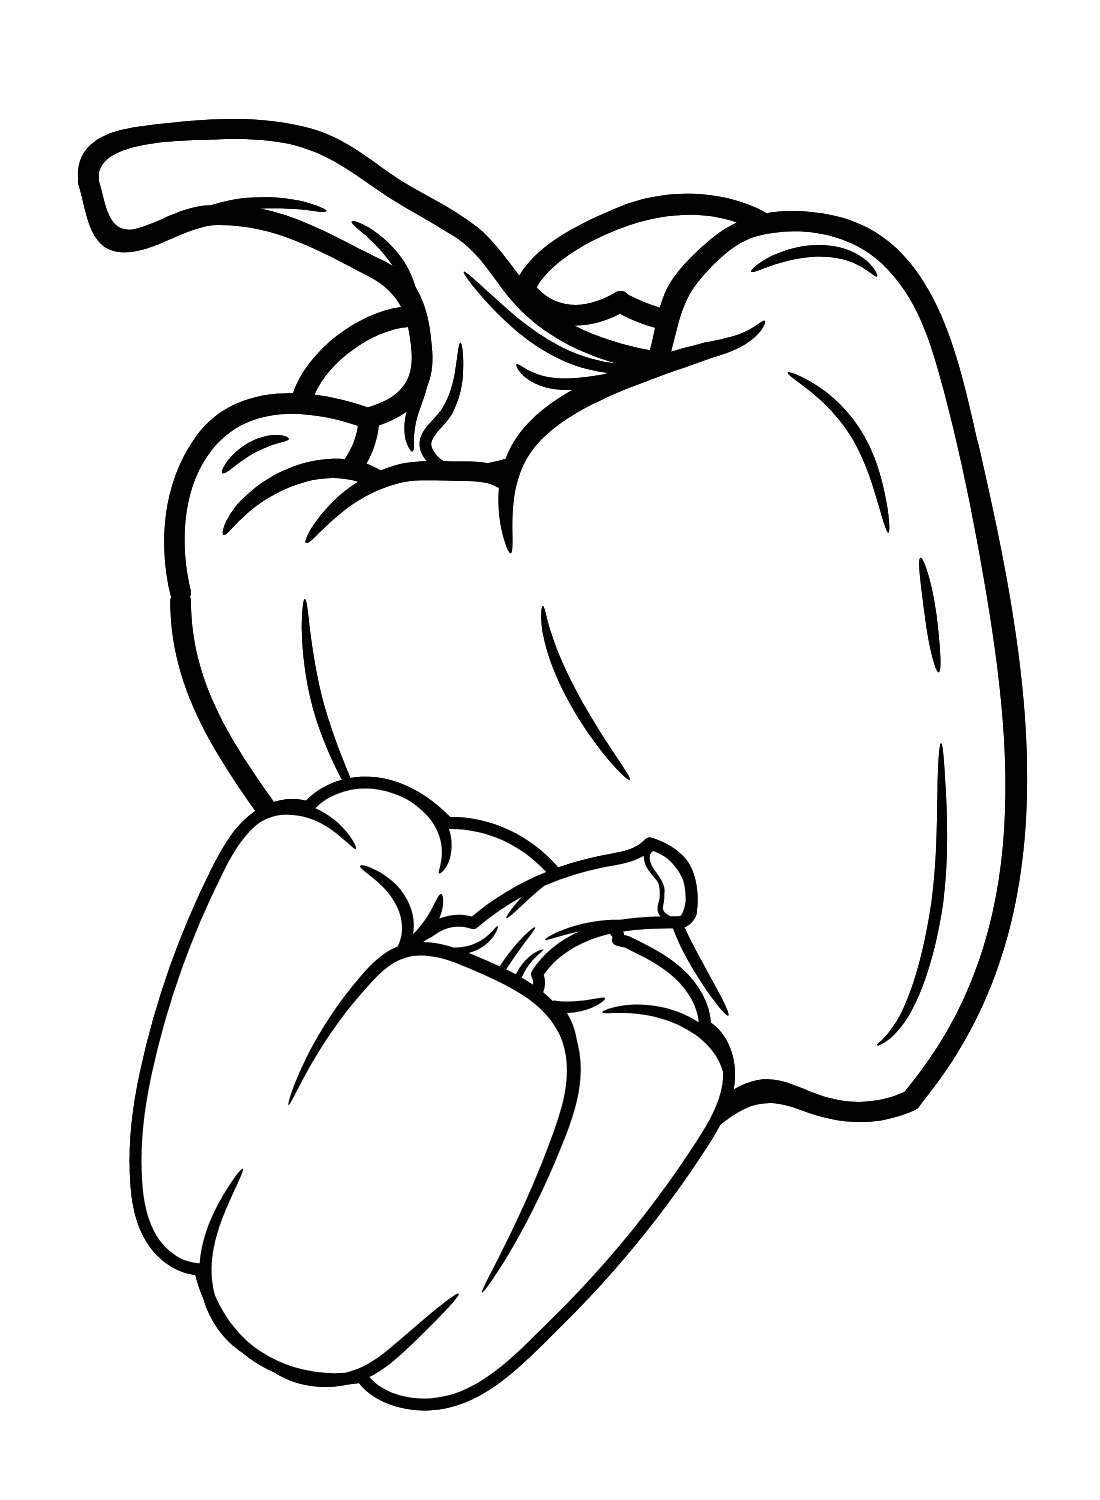 Bell pepper coloring pages printable for free download